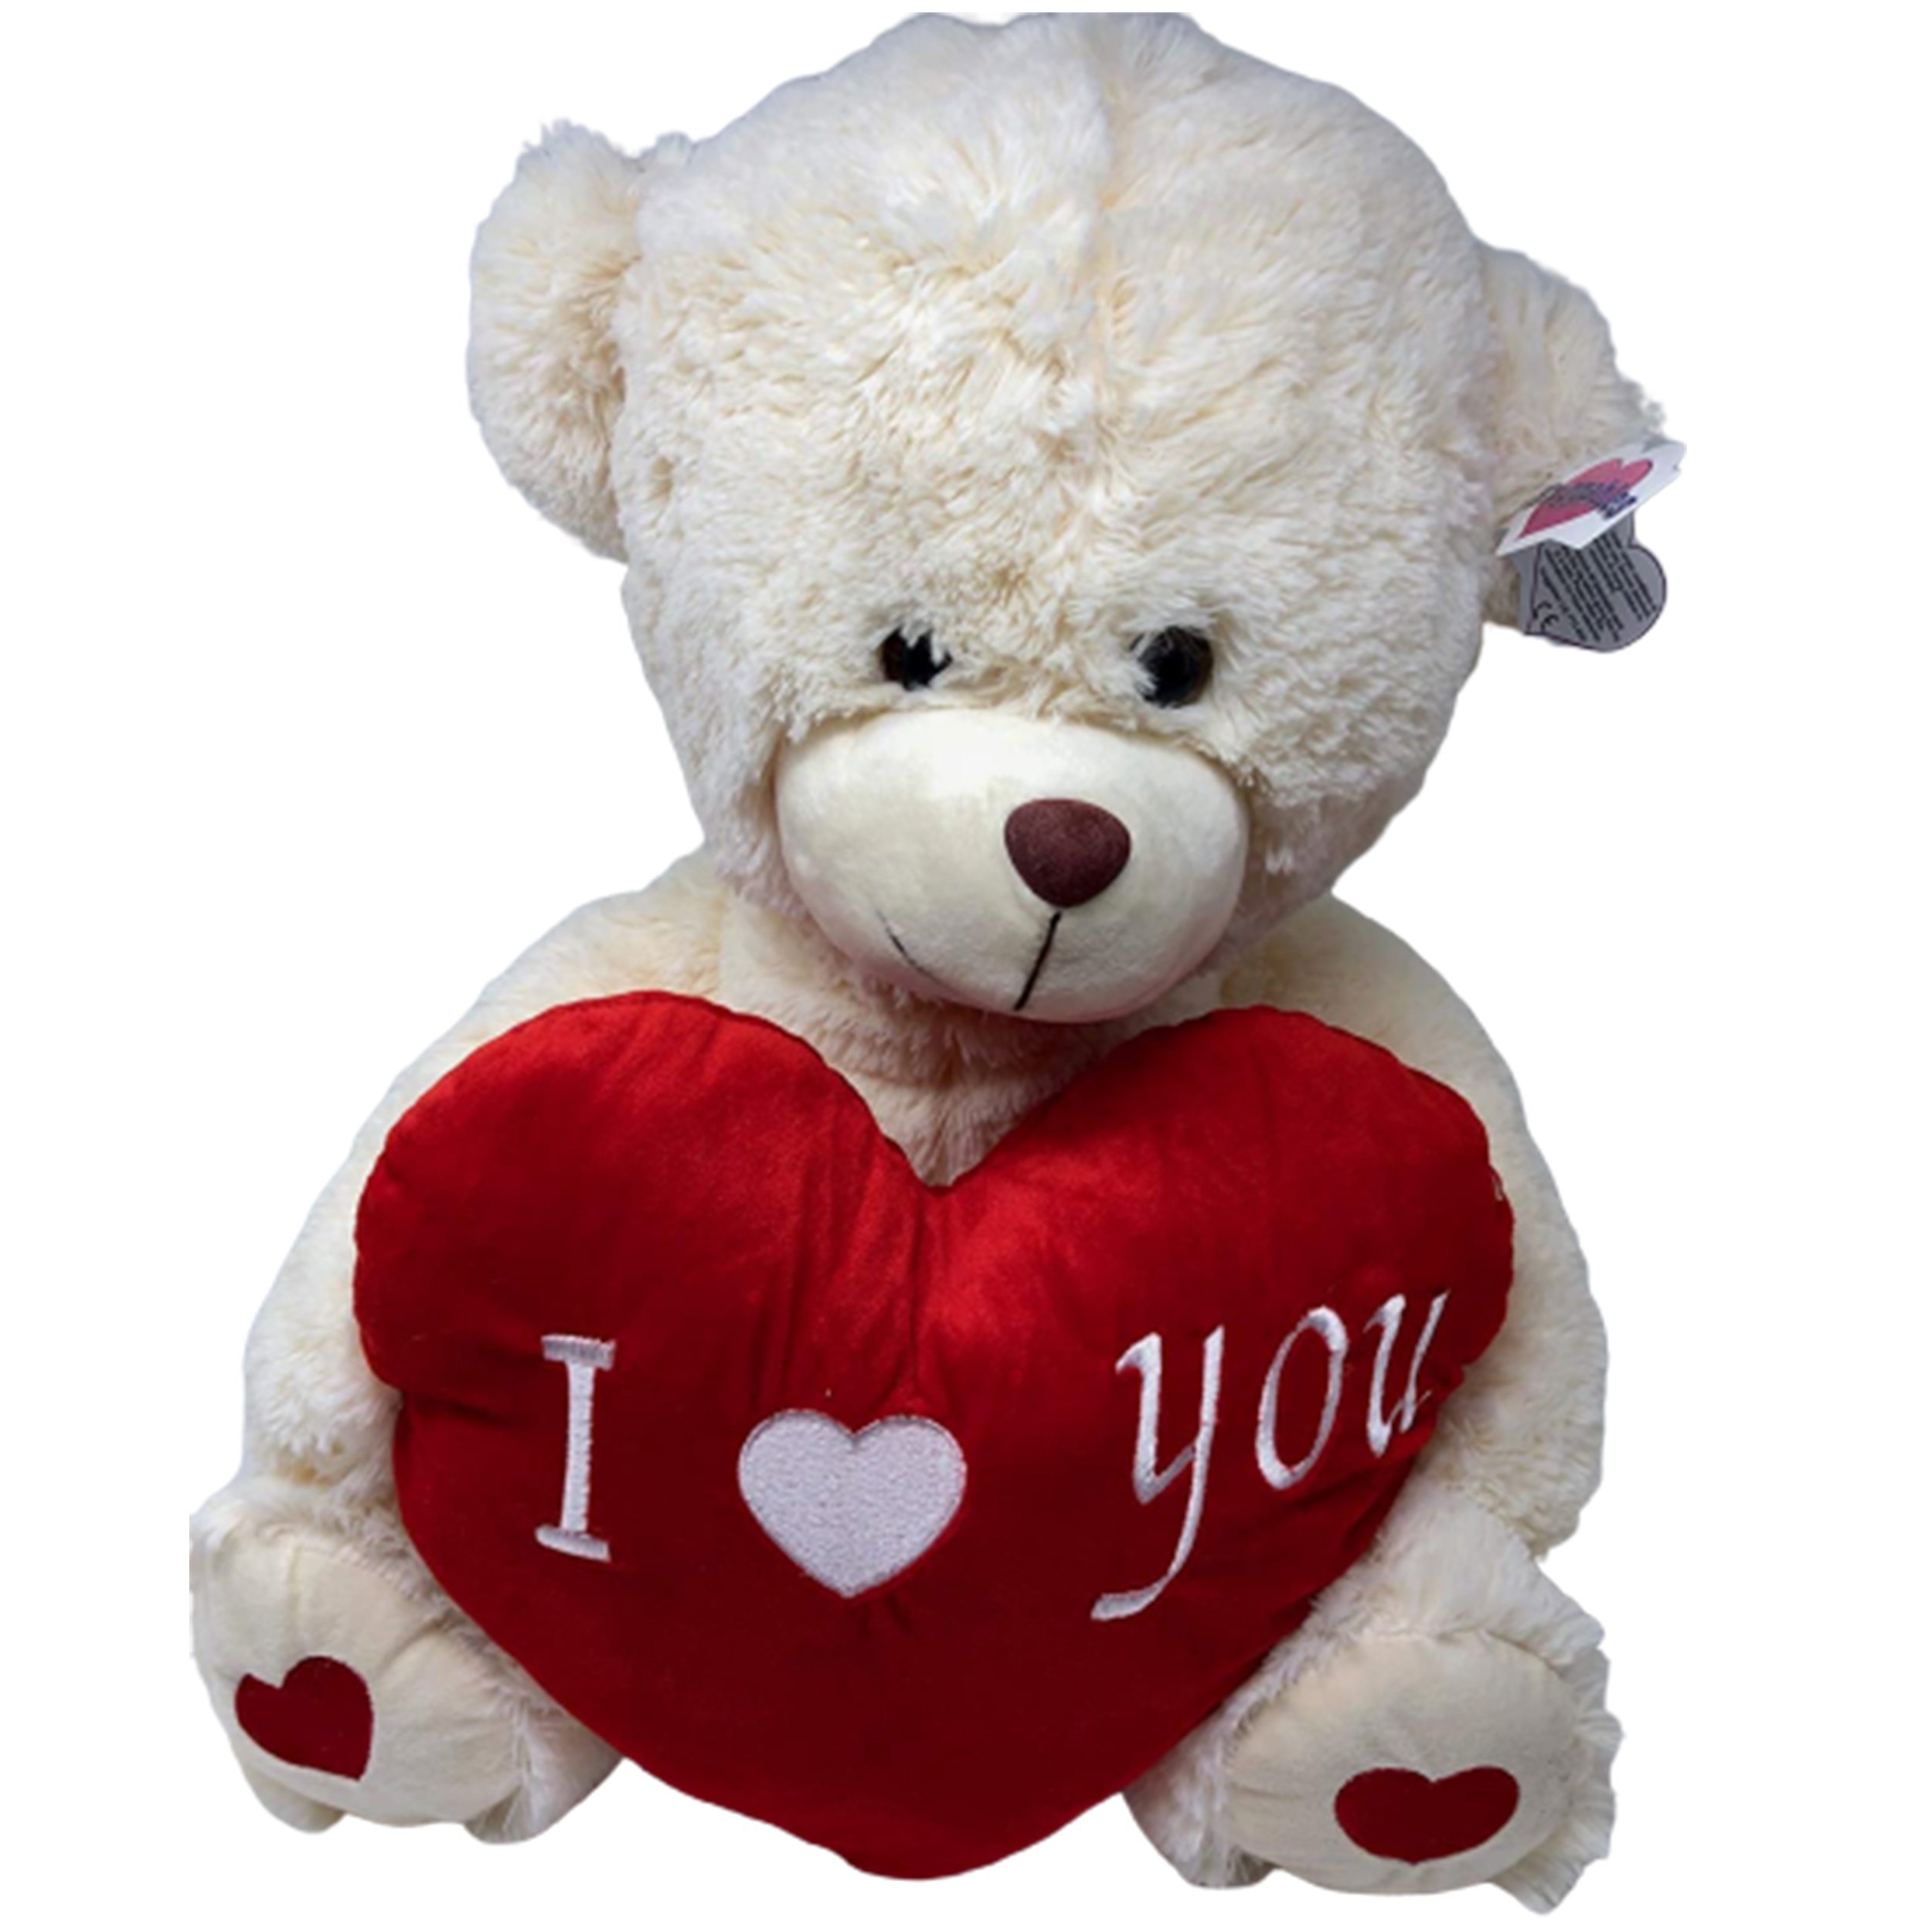  Love You Teddy Bear Images